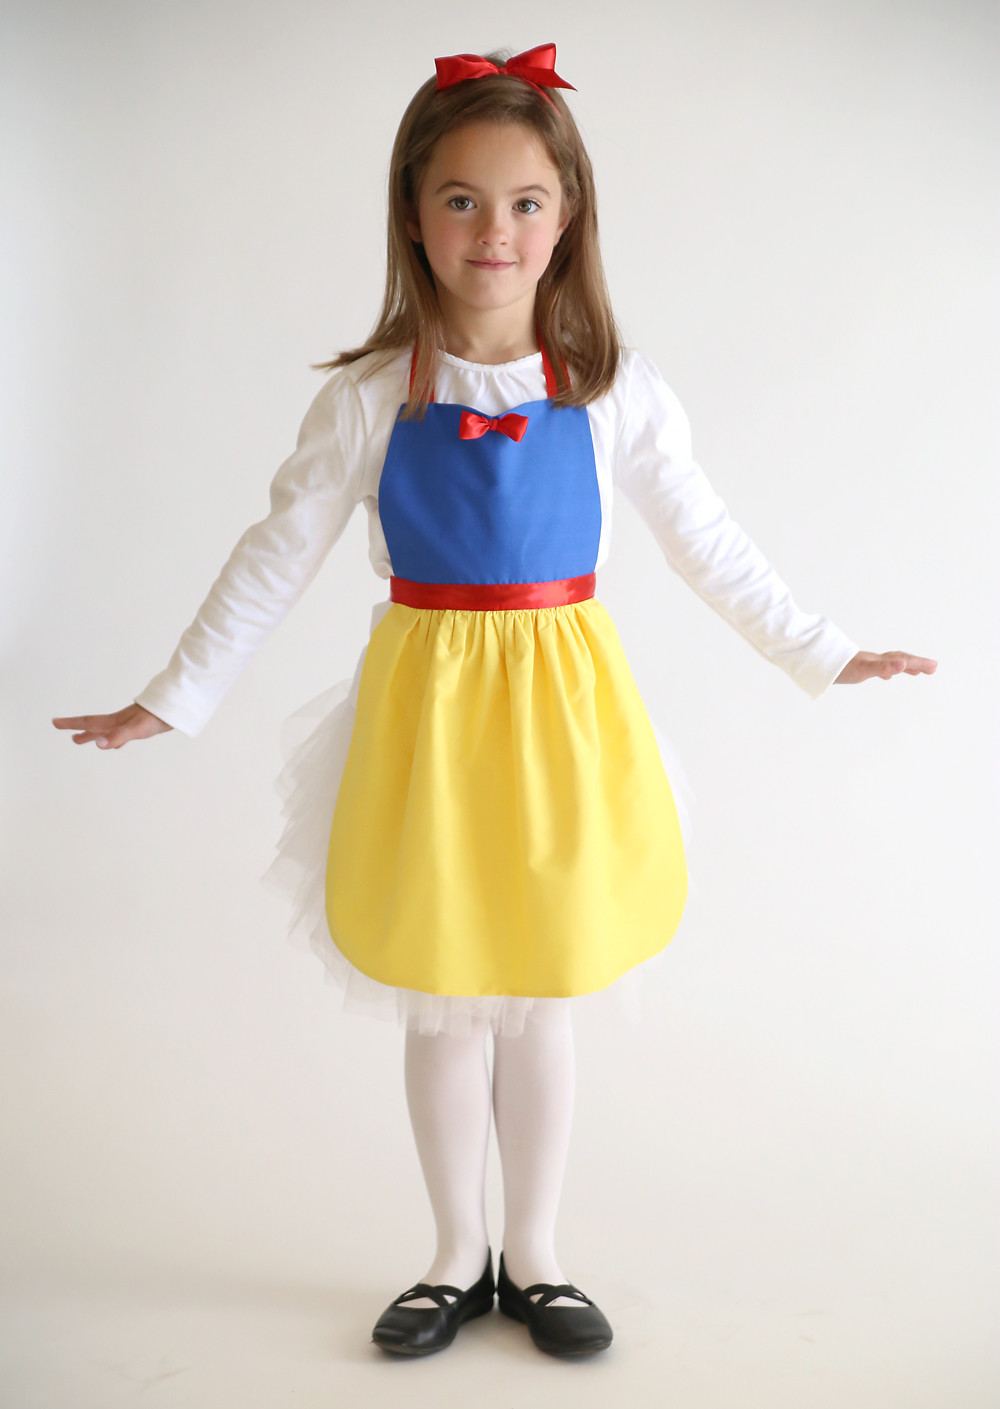 DIY Snow White Costume Toddler
 free sewing pattern for Snow White princess dress up apron